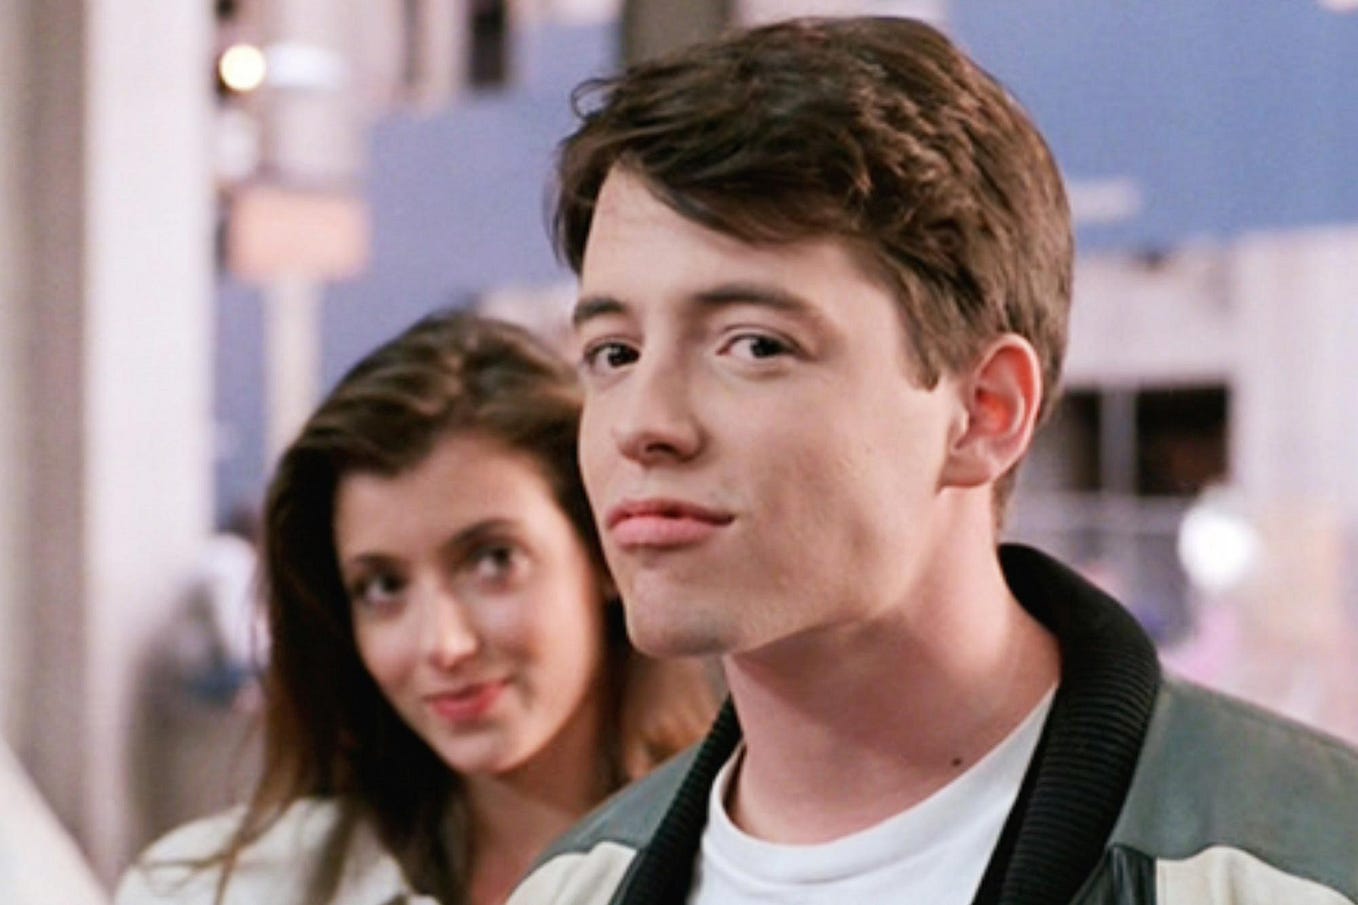 Growing Up Like Cameron Frye: A Trans Narrative, by malcolmhughes